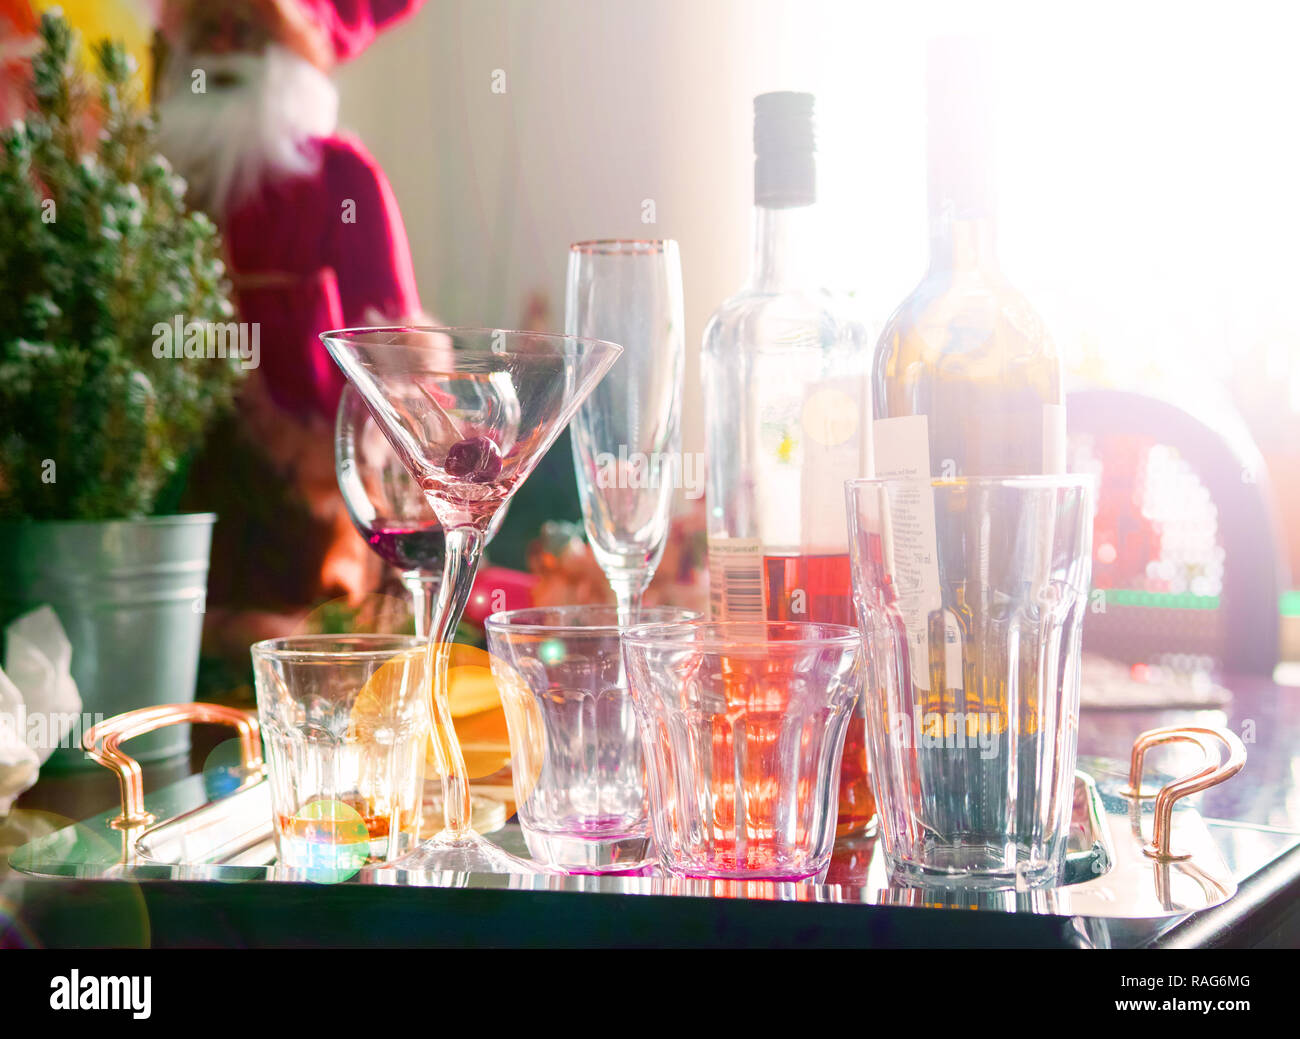 Early morning after the Christmas party, a tray with empty glasses and two bottles. Stock Photo